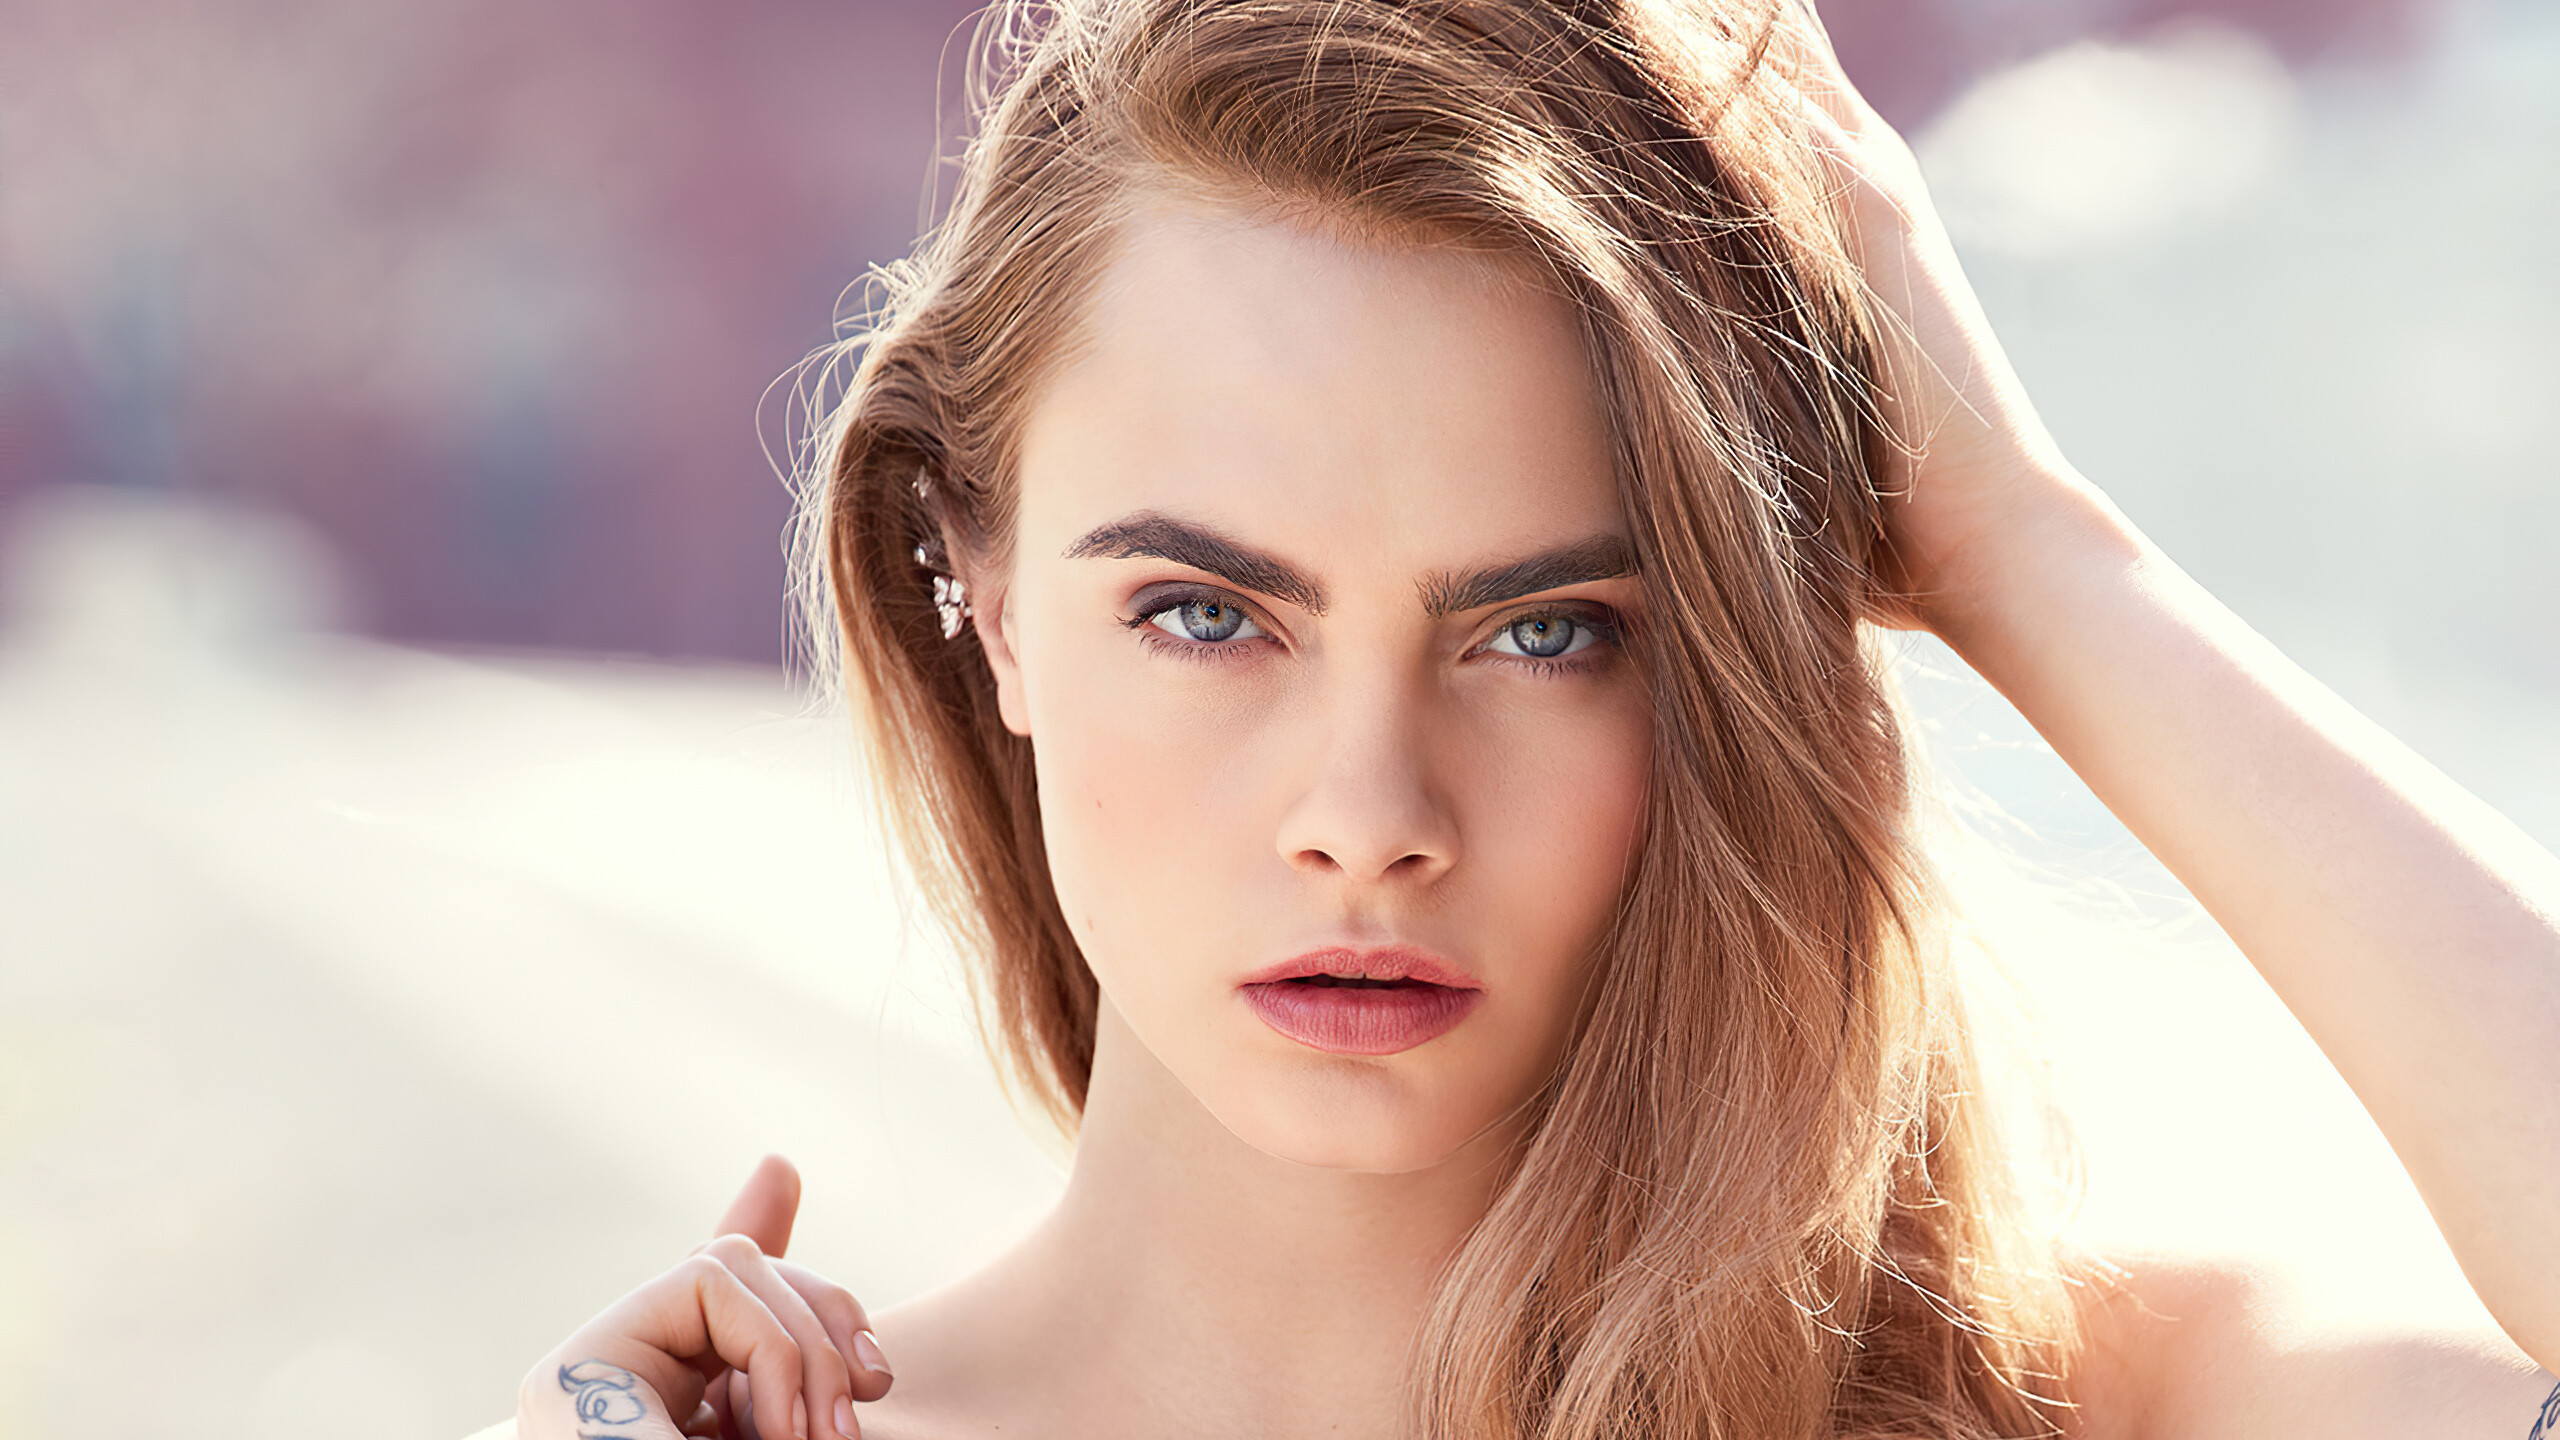 Cara Delevingne: A fashion model, The face of Burberry's Beauty campaign. 2560x1440 HD Wallpaper.